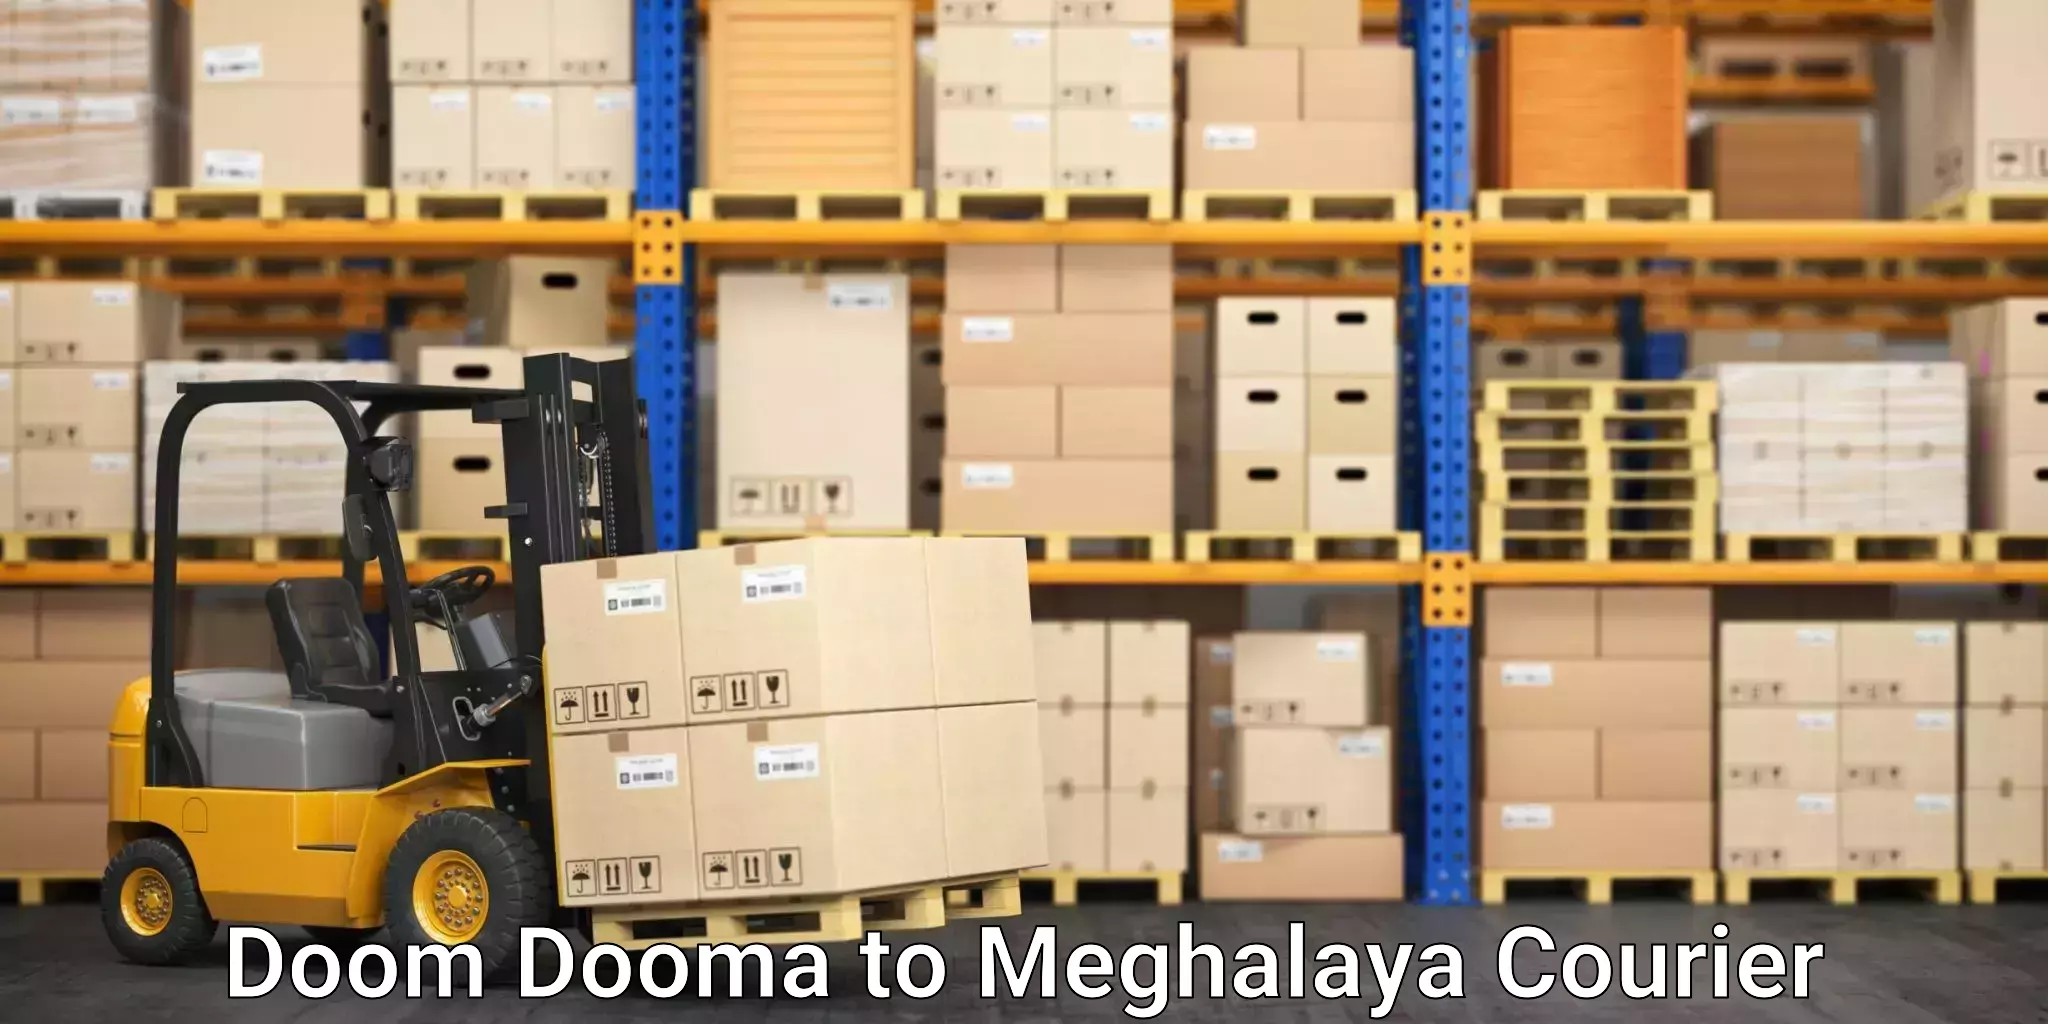 Express package delivery in Doom Dooma to Shillong